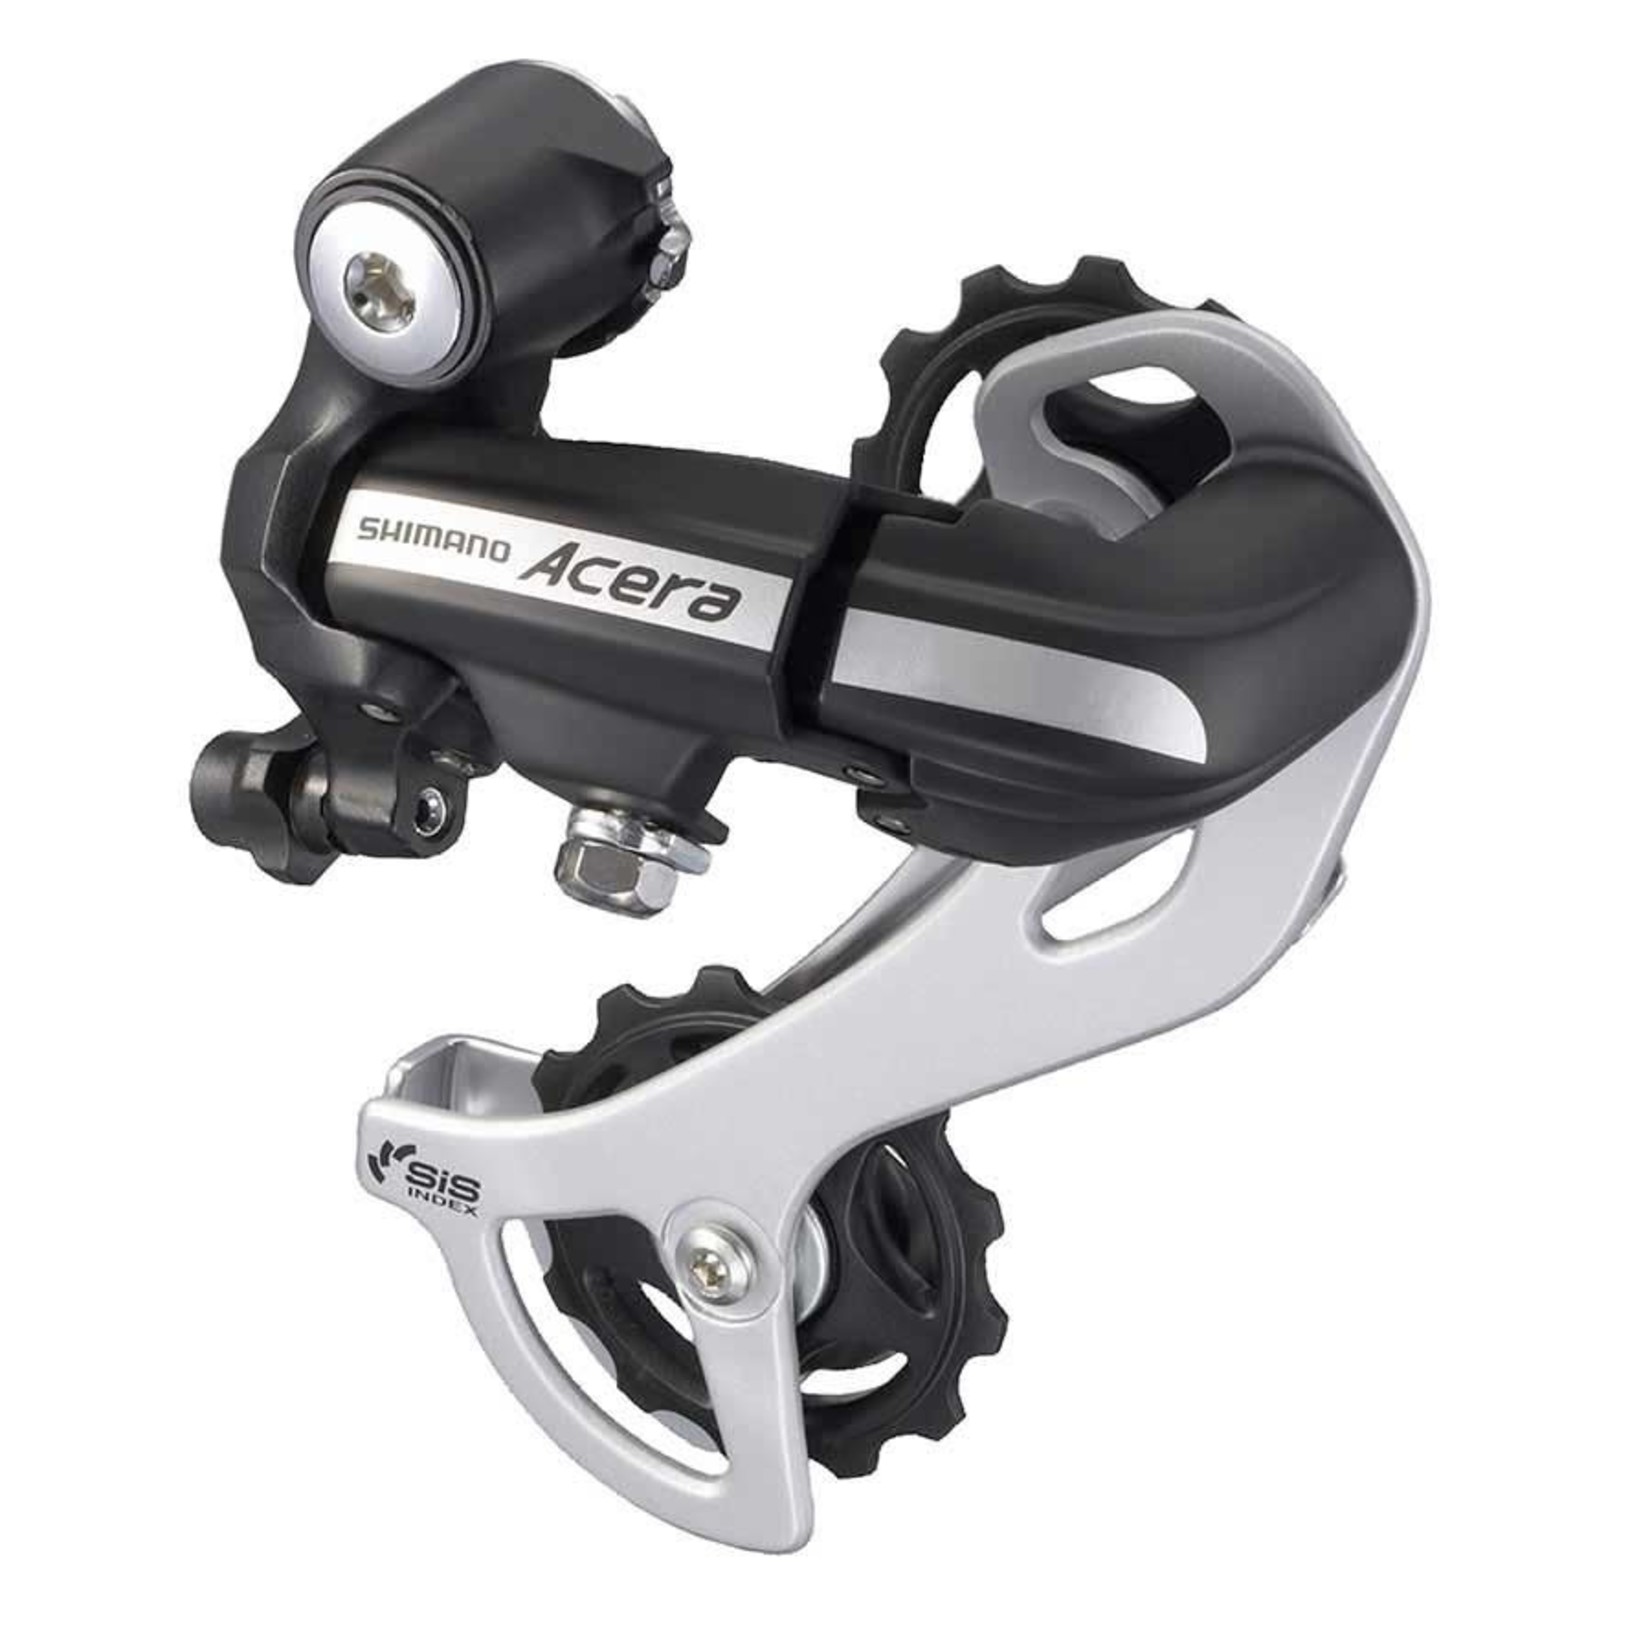 Shimano SHIMANO, REAR DERAILLEUR, RD-M360-L, ACERA, SGS 7/8-SPEED, DIRECT ATTACHMENT, BLACK, IND.PACK